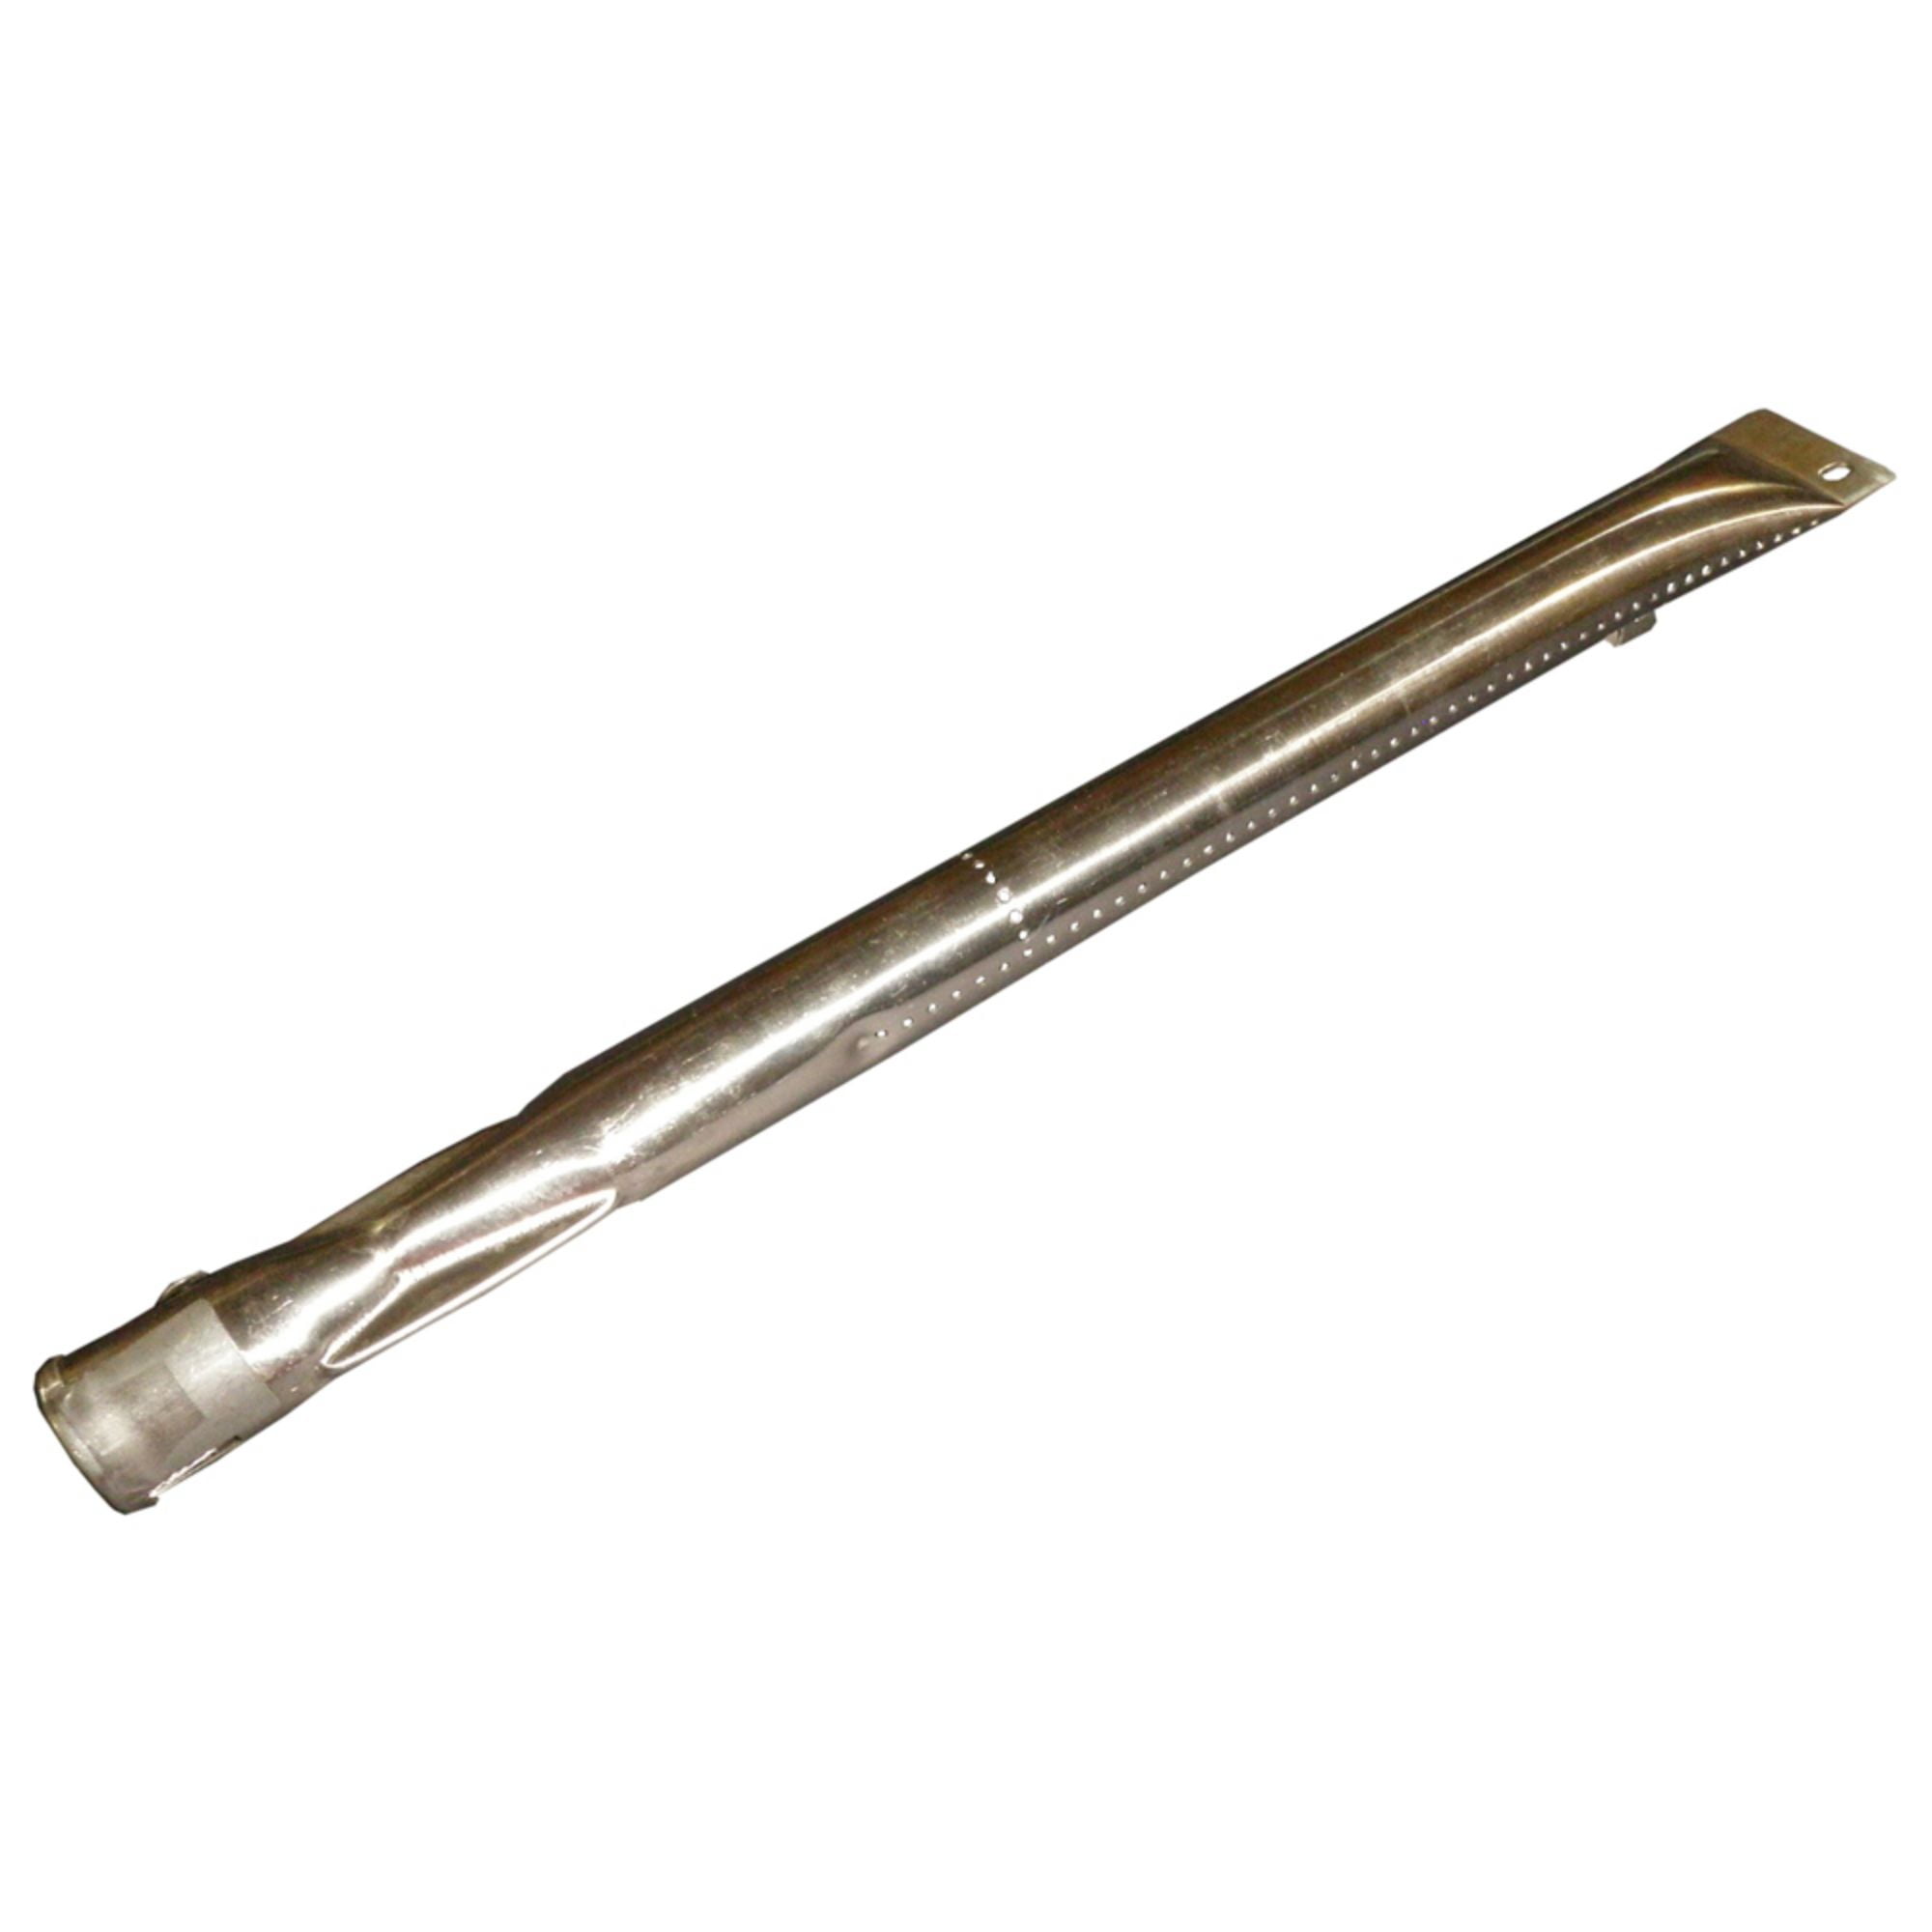 Stainless steel burner for Master Forge brand gas grills